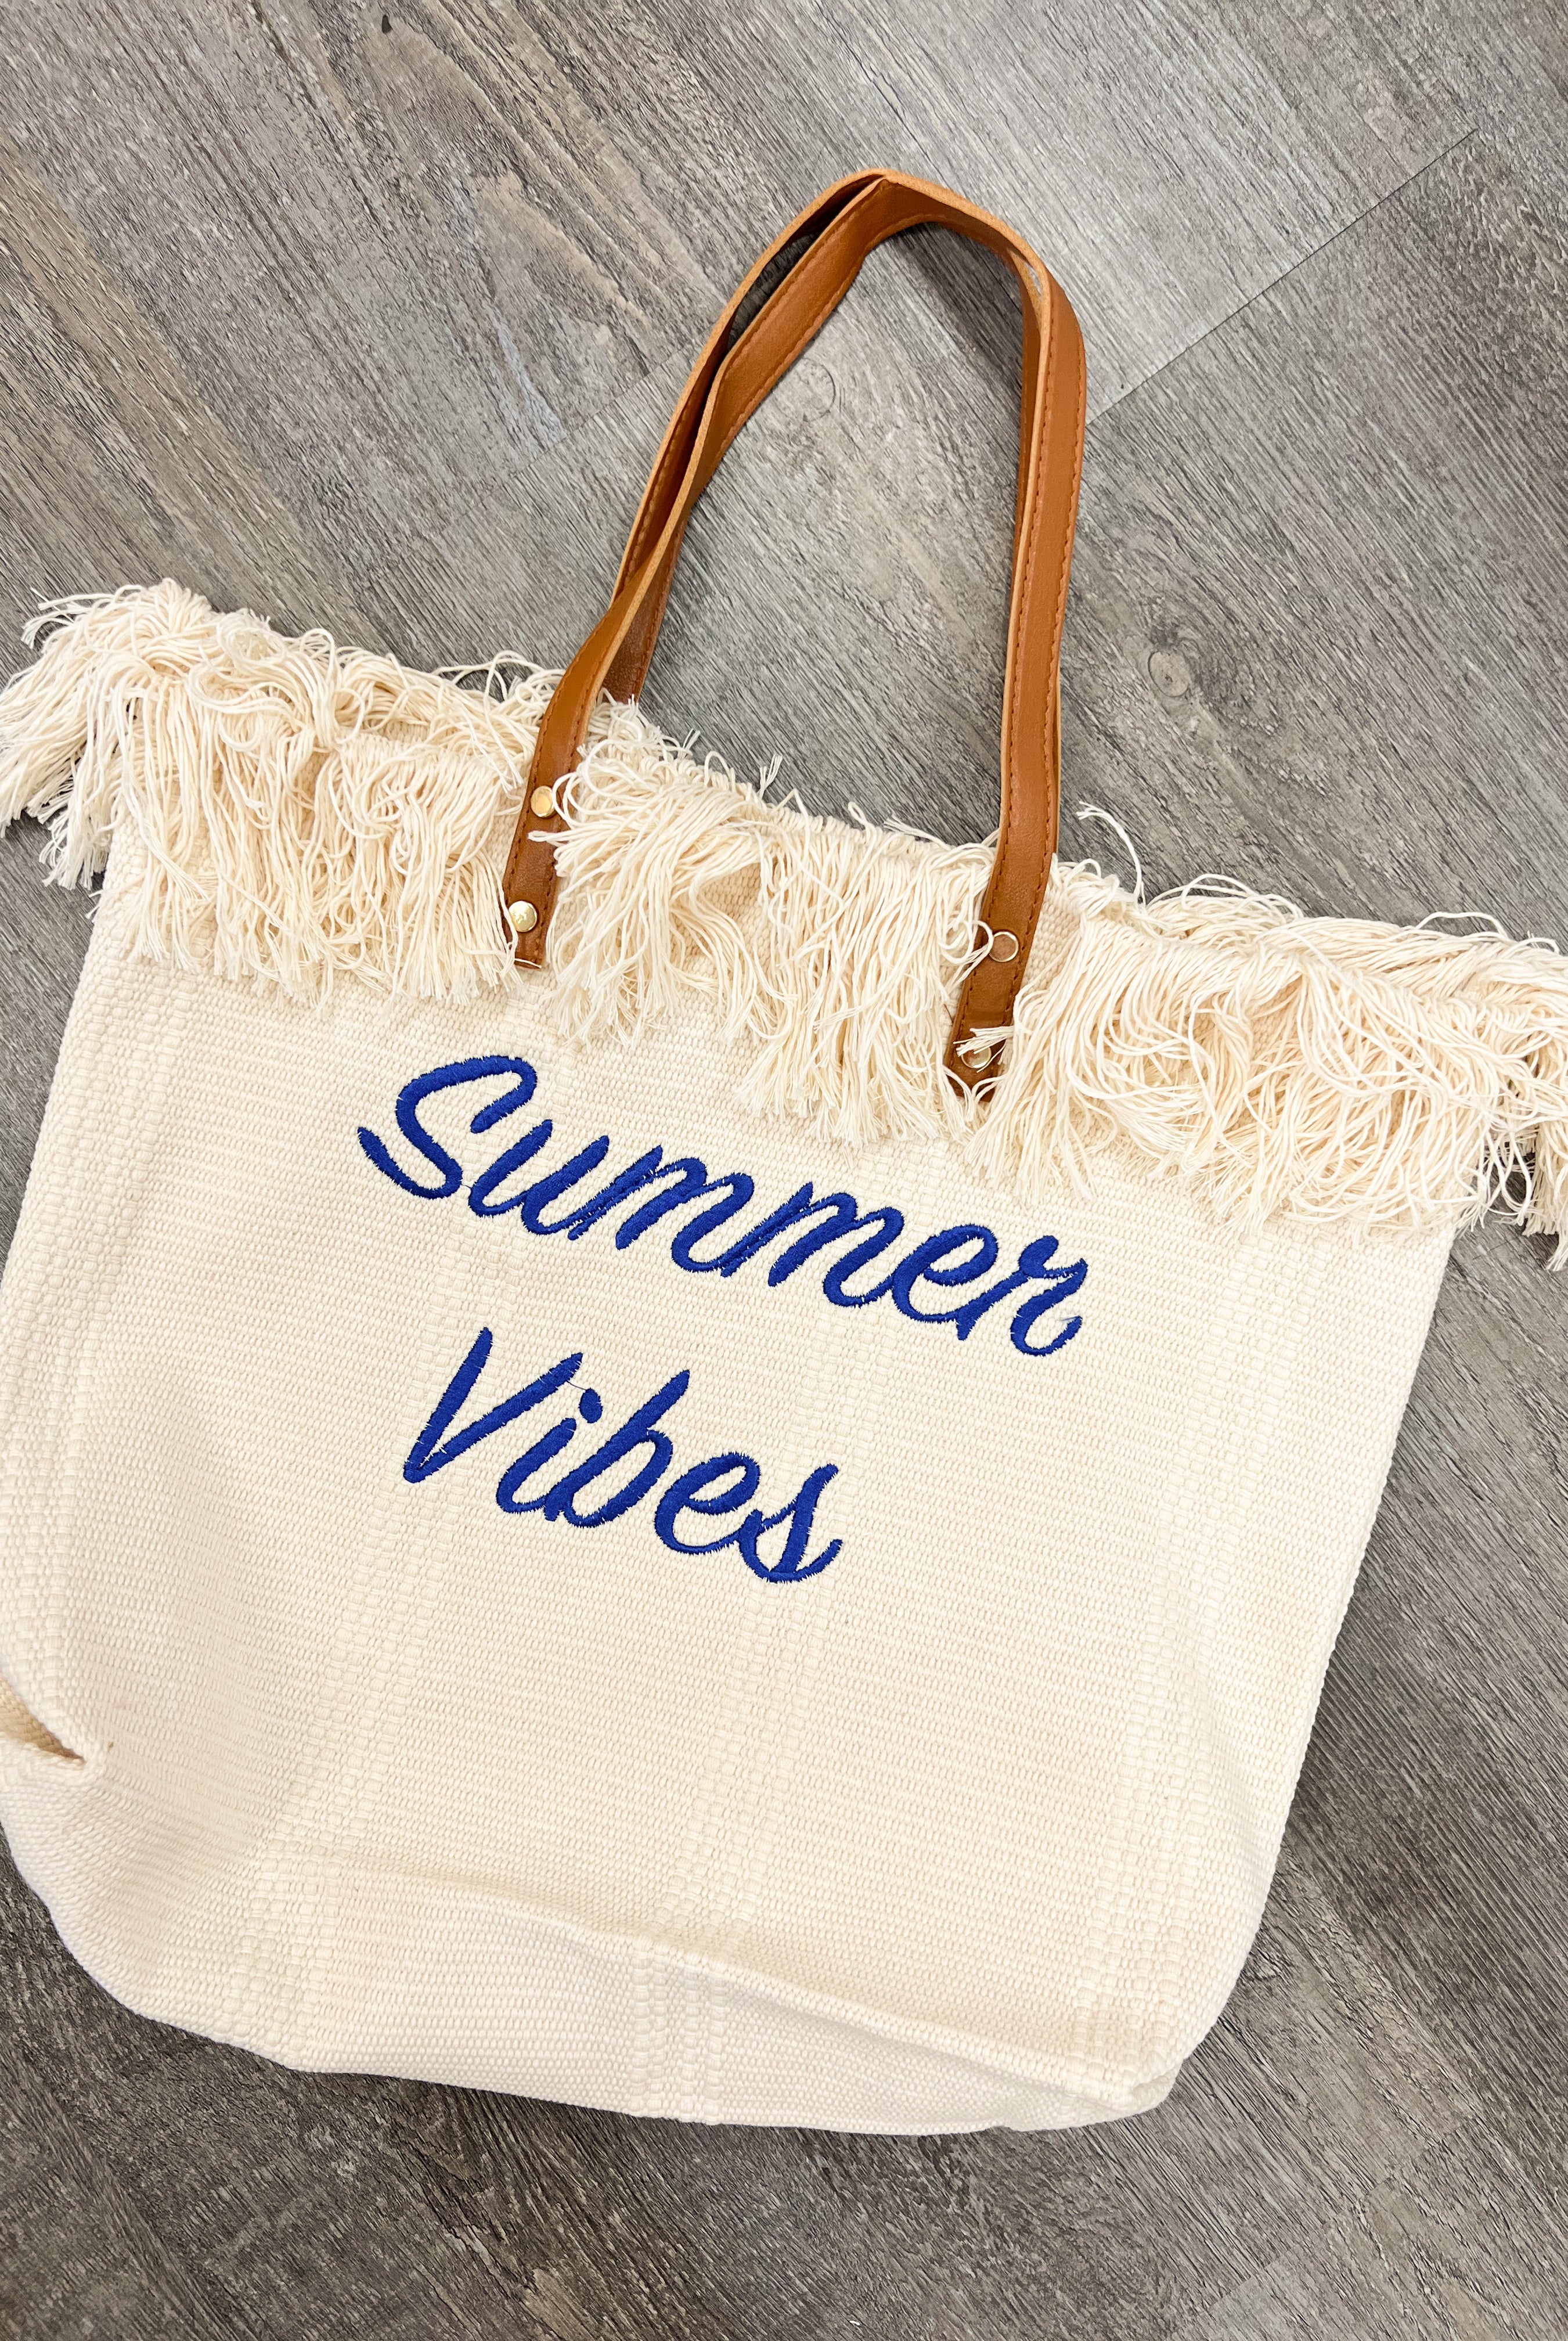 Summer Vibes Fringed Tote-Tote Bags-The Lovely Closet-The Lovely Closet, Women's Fashion Boutique in Alexandria, KY